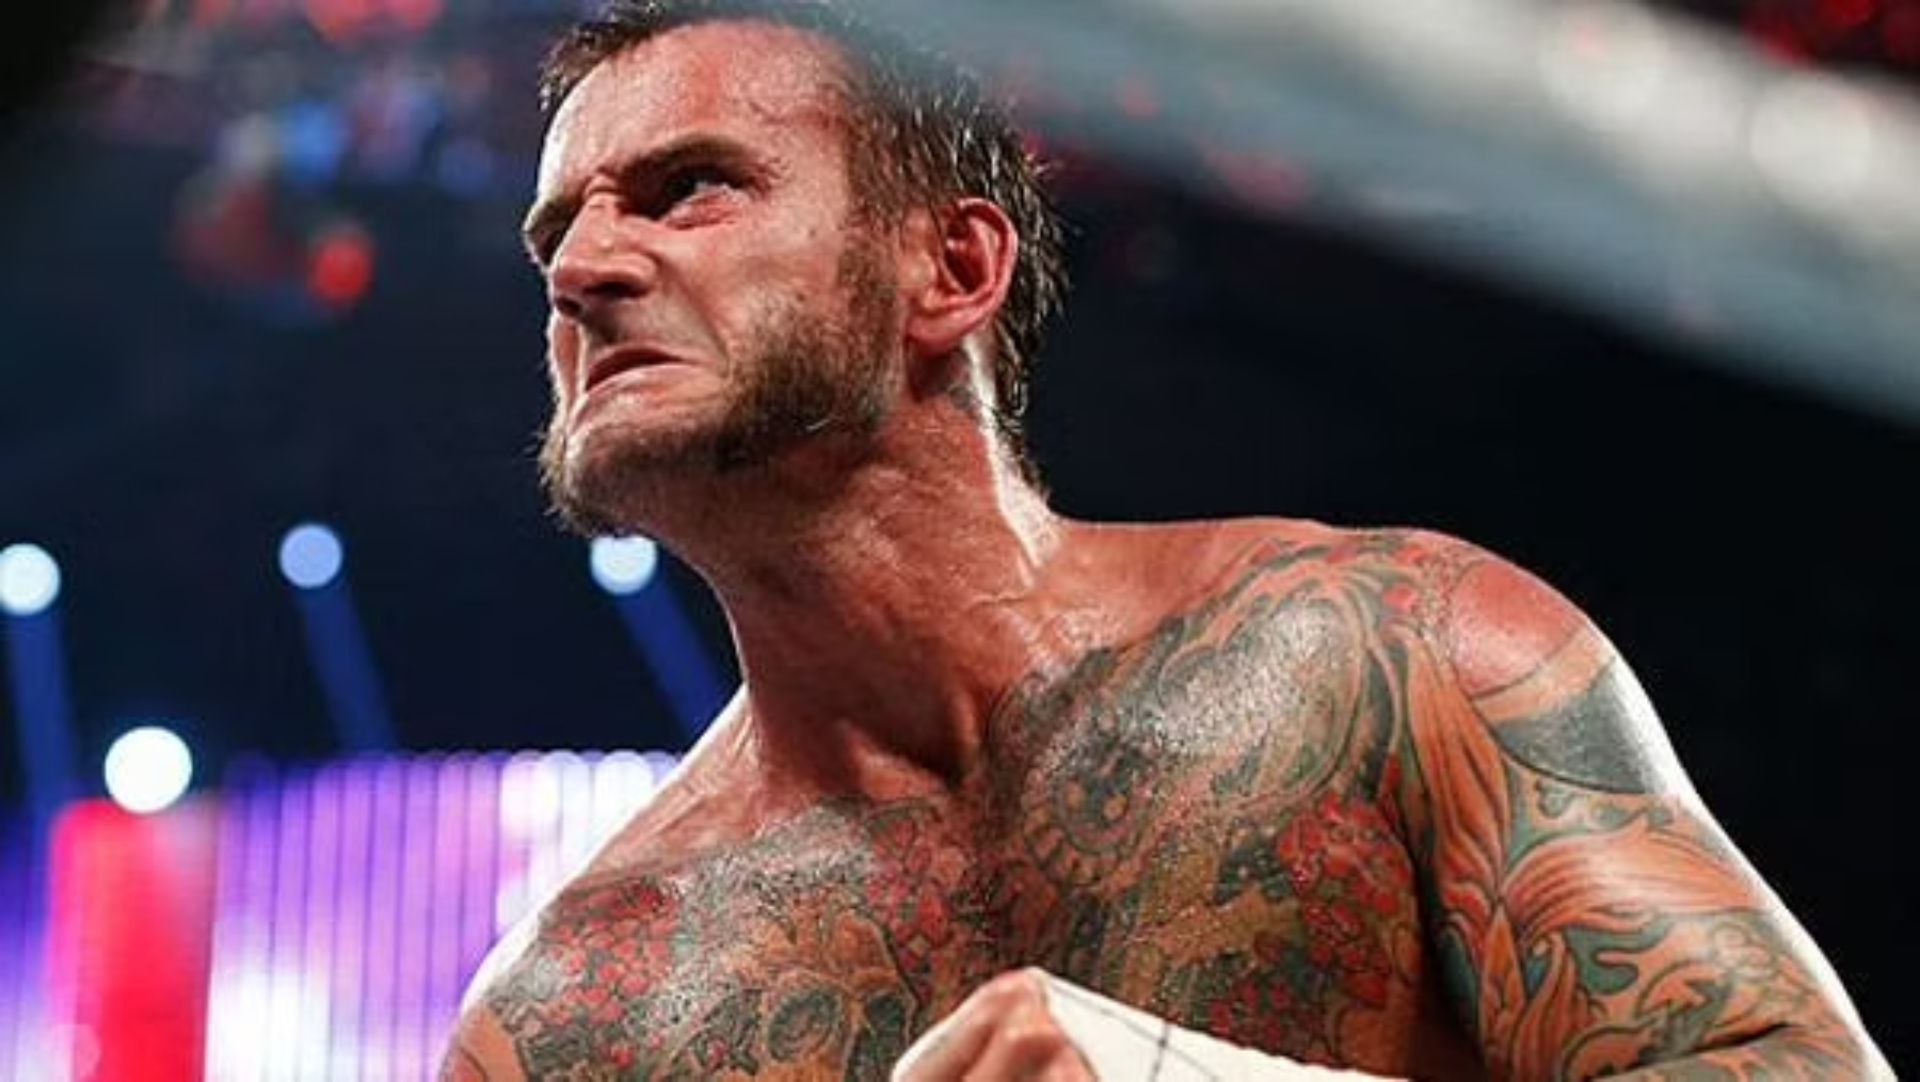 CM Punk left the WWE in 2014 on bad terms.